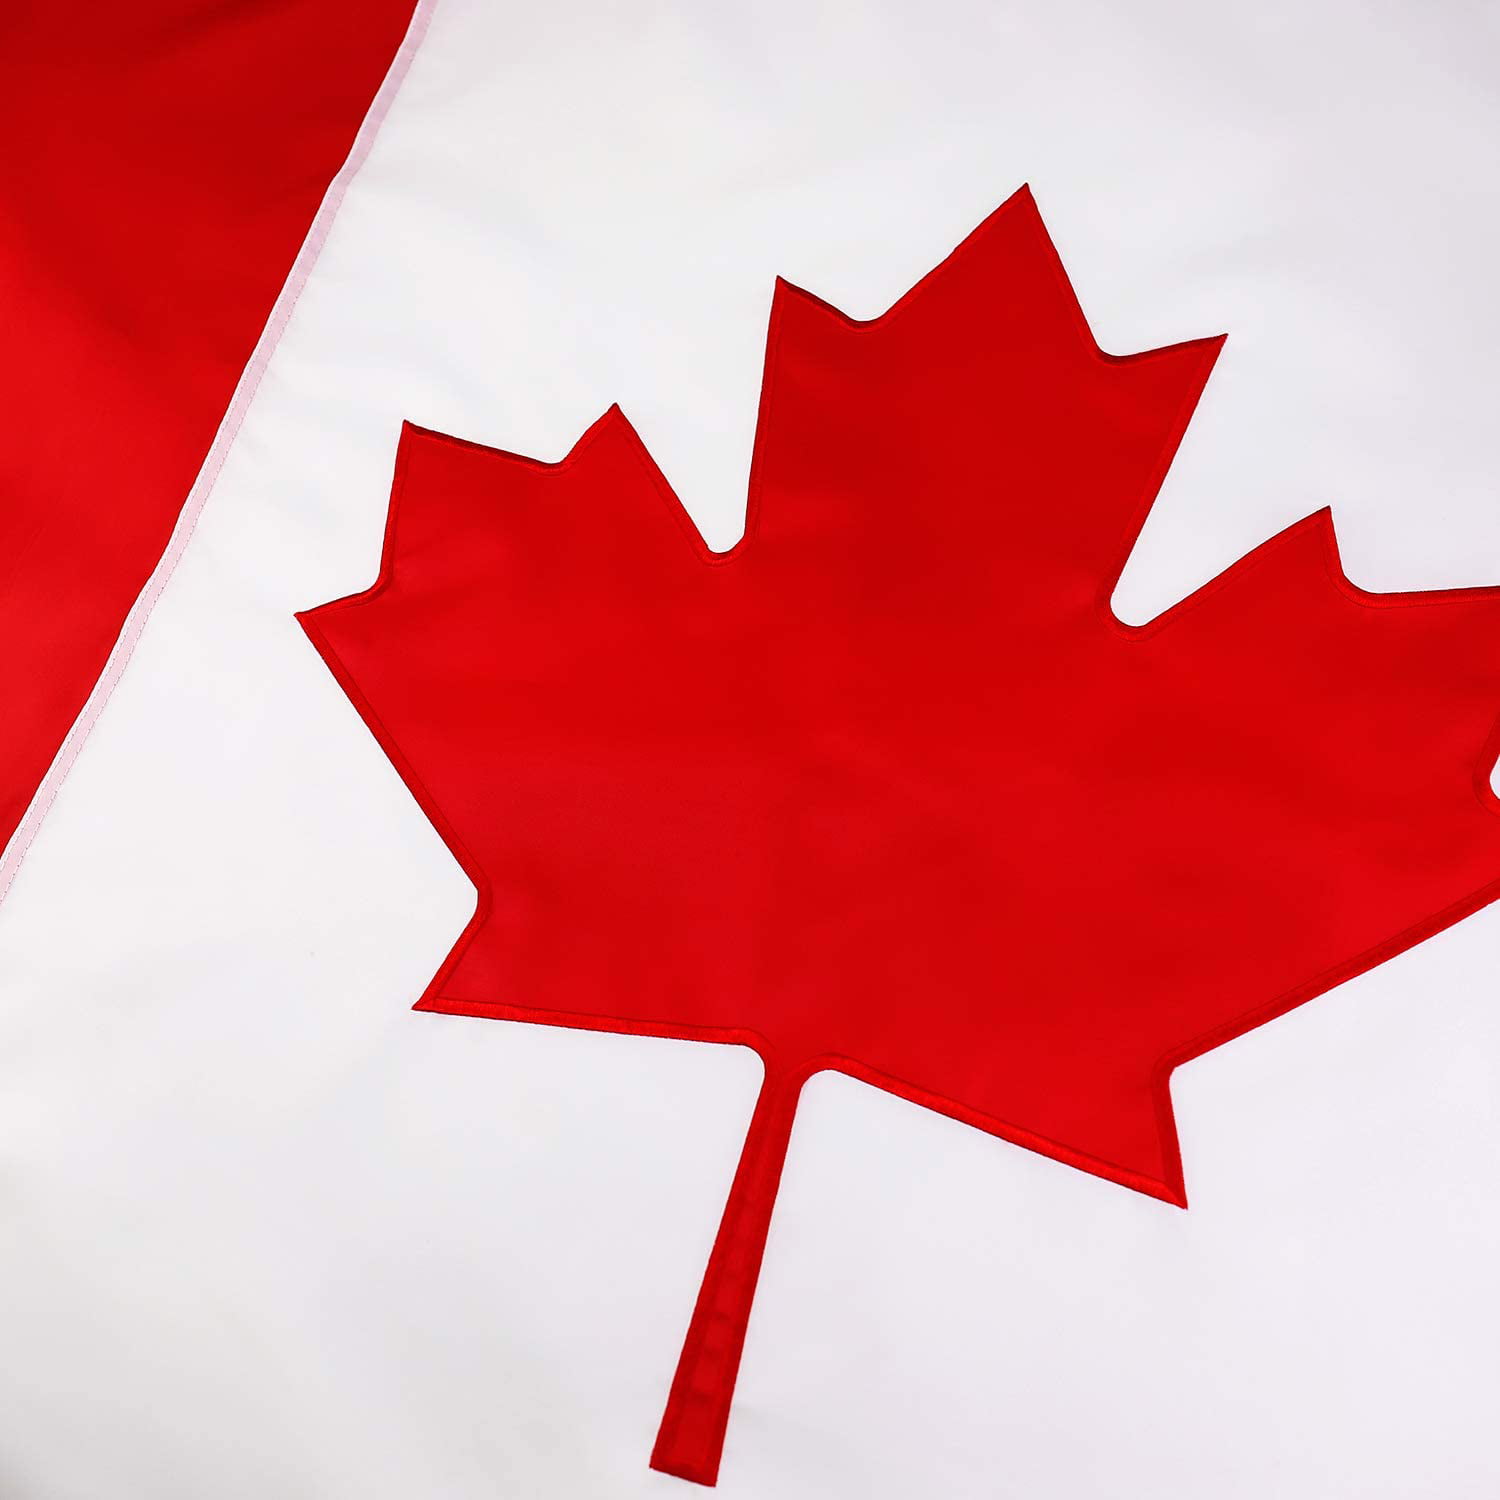 Details about   Canadian Flag 3 x 5 ft Polyester Canada Maple Leaf Banner Indoor Outdoor Grommet 